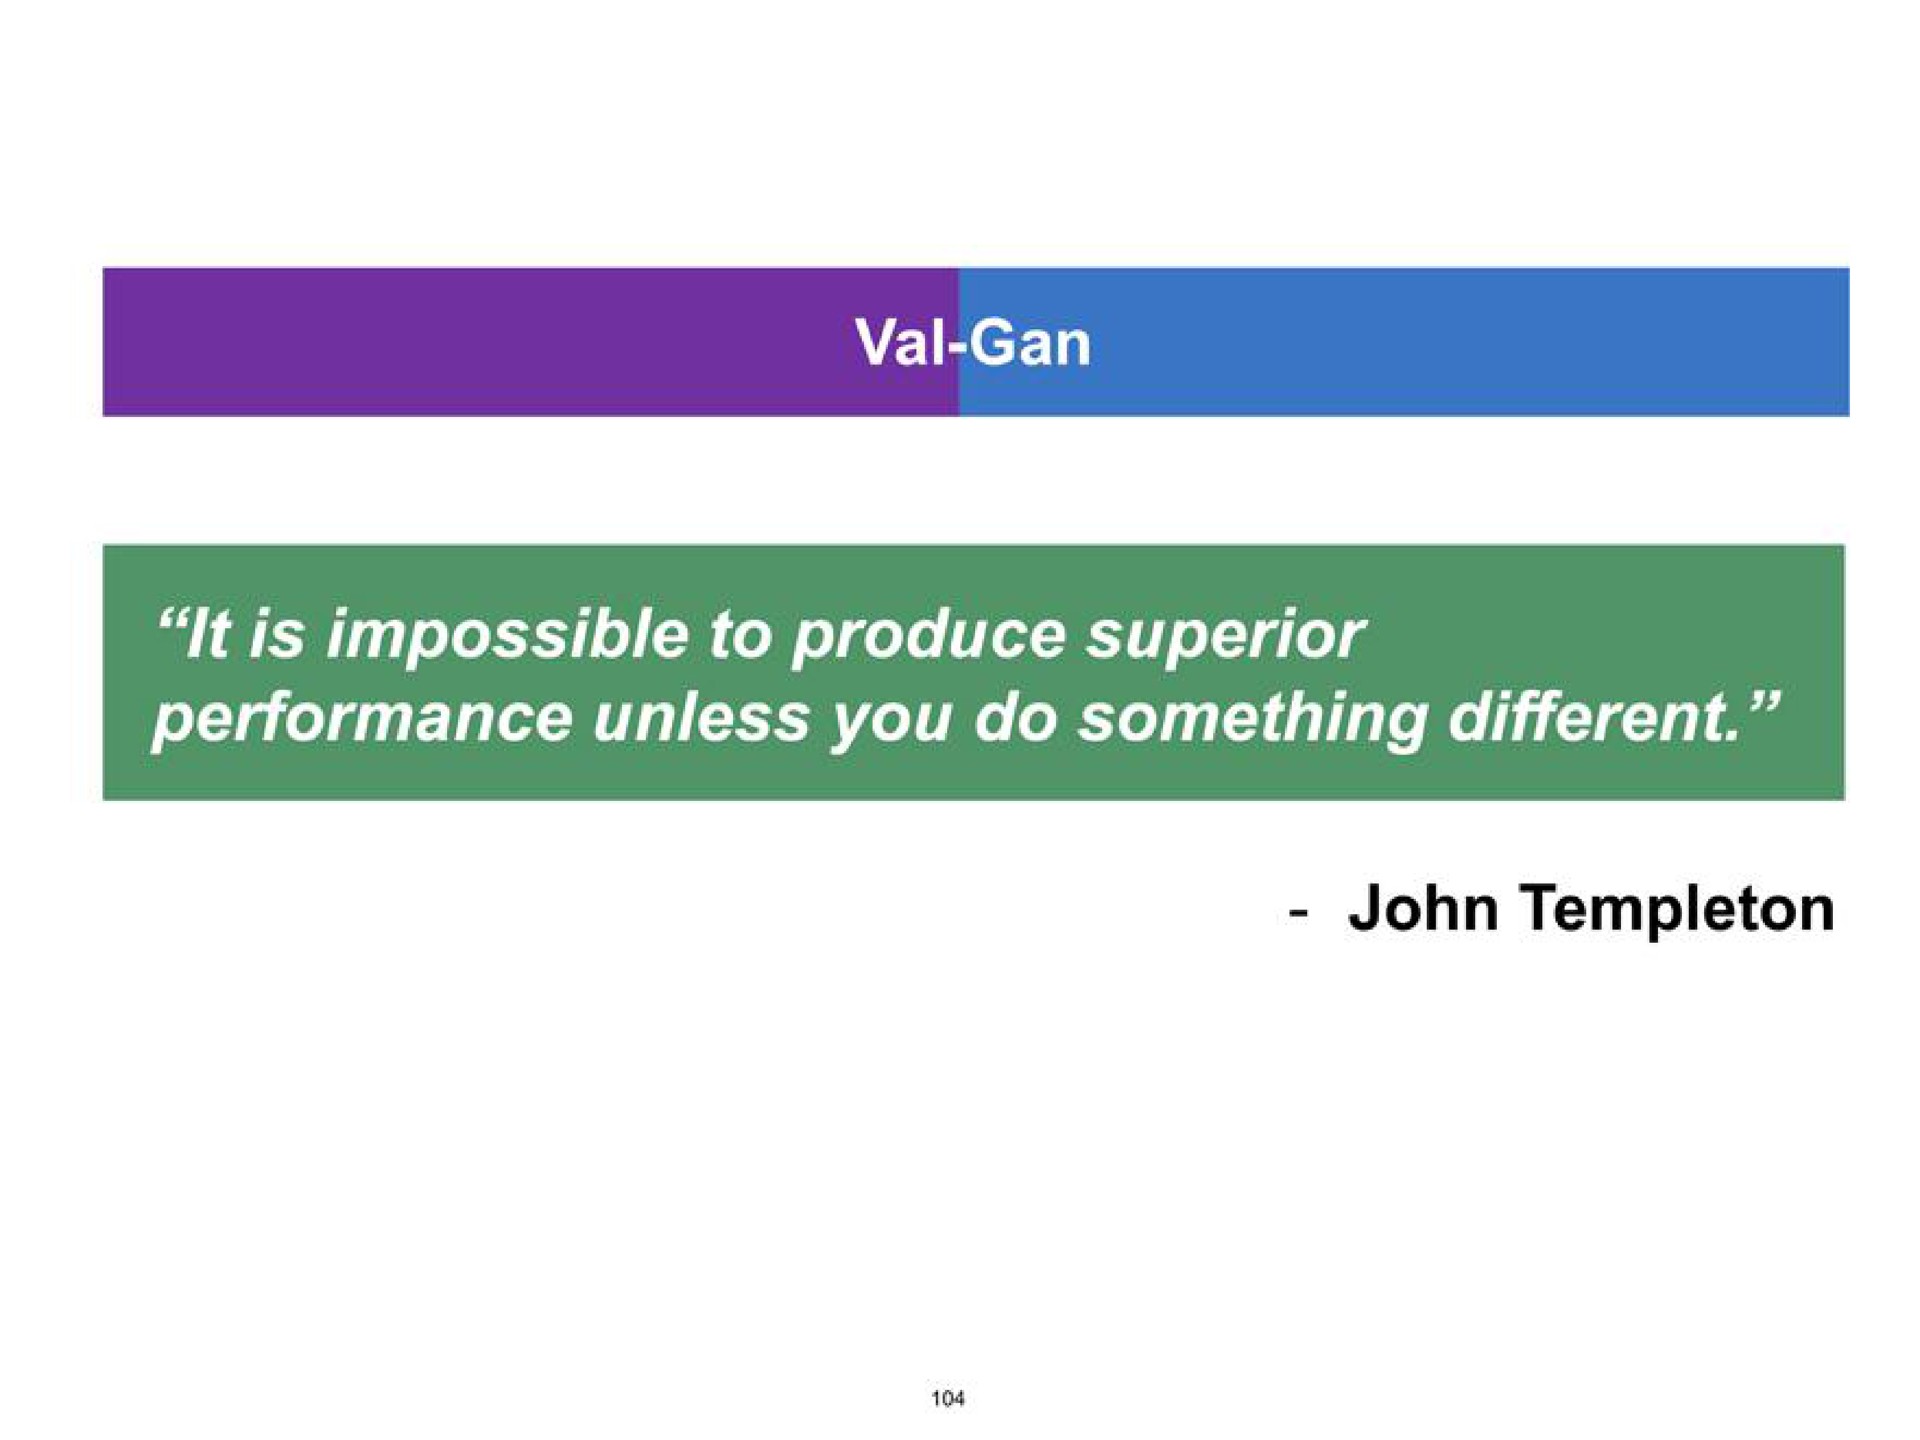 it is impossible to produce superior performance unless you do something different | Pershing Square